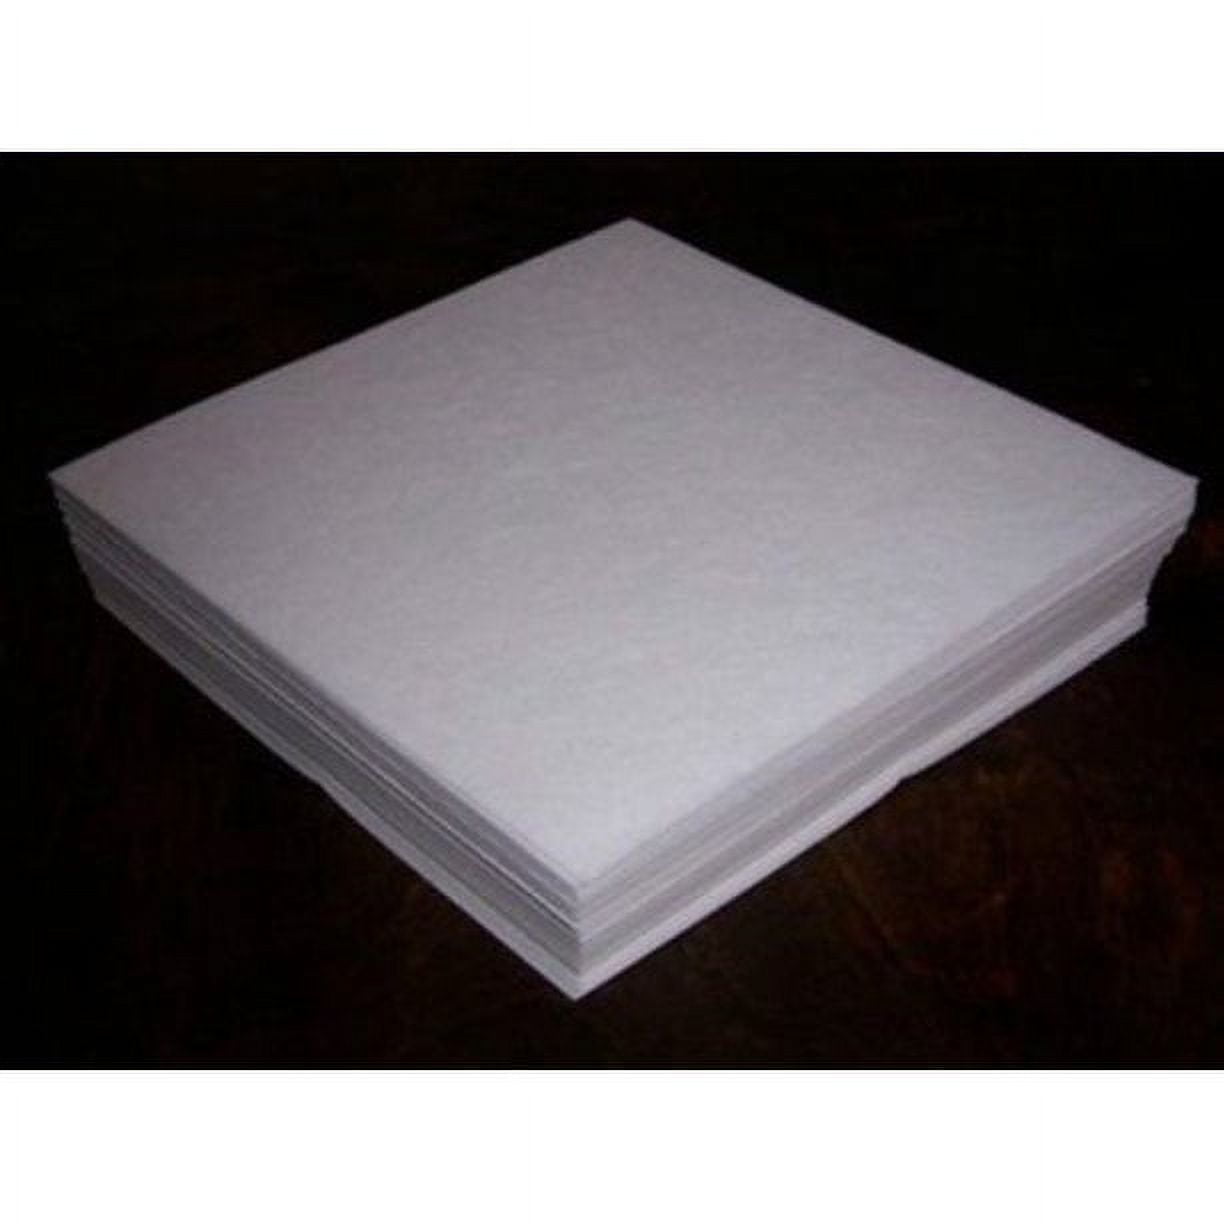 300 Sheets Tear Away Machine Embroidery Stabilizer 8 x 8 Medium Weight 2.5  Ounce Embroidery Machine Paper Embroidery Paper for Machine Embroidery Fits